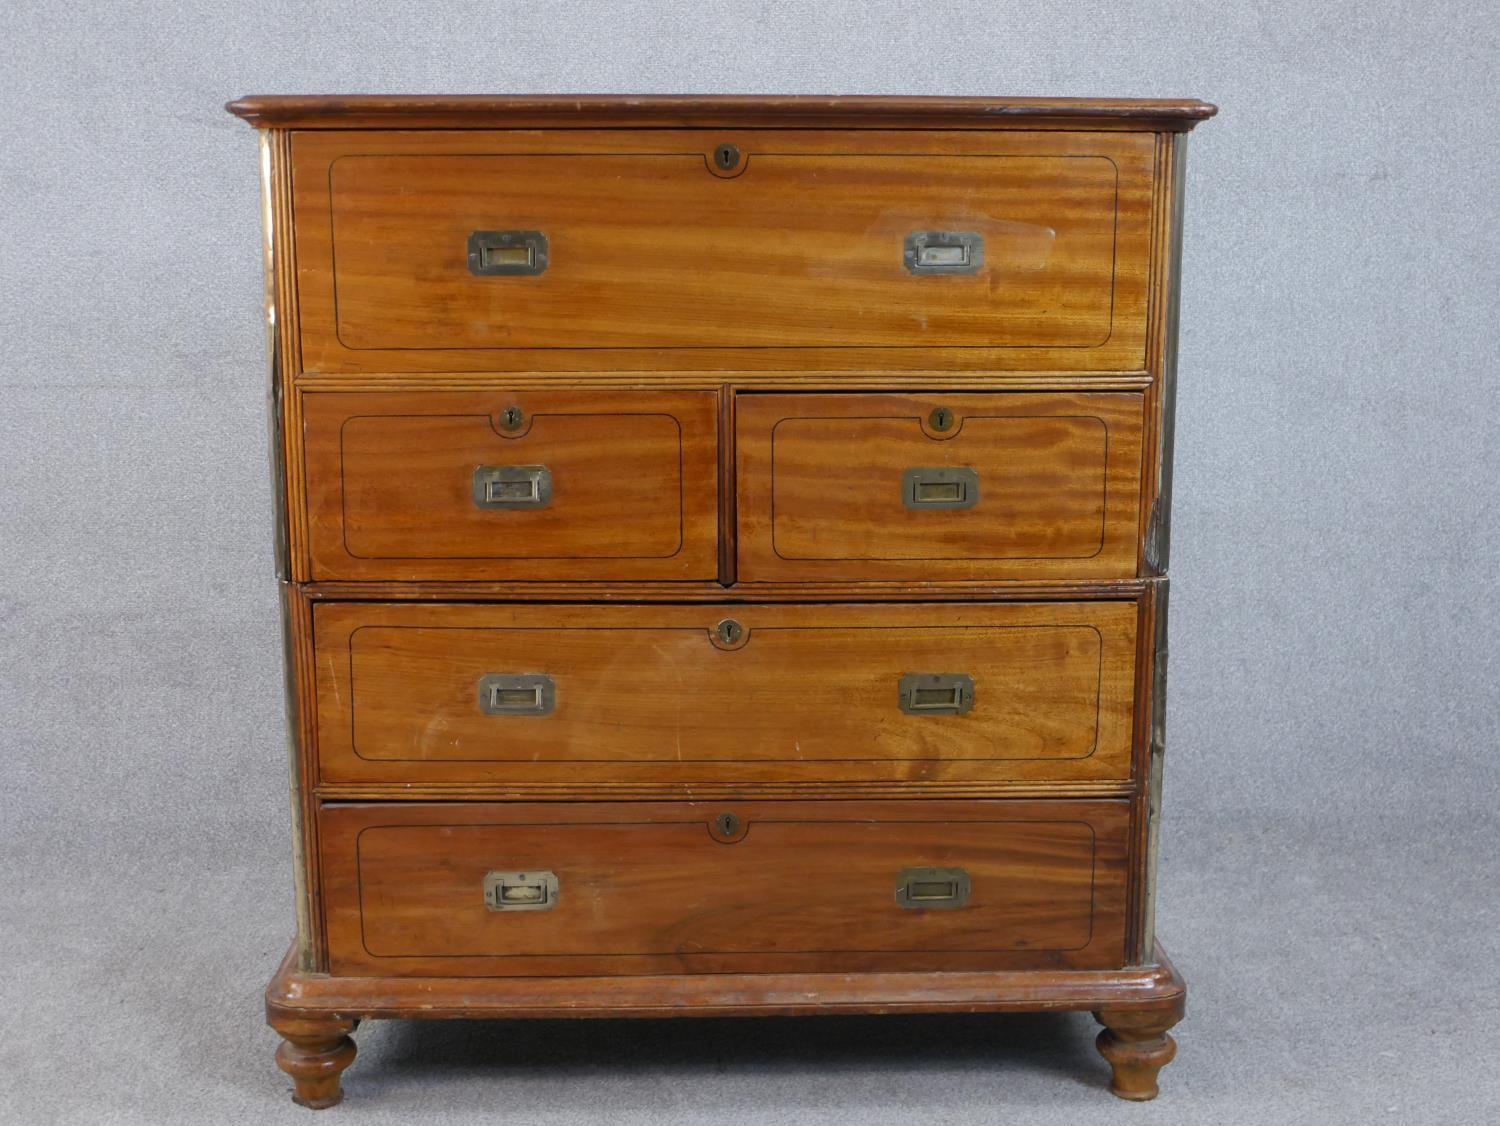 A 19th century camphorwood secretaire campaign chest, in two sections, with a secretaire drawer